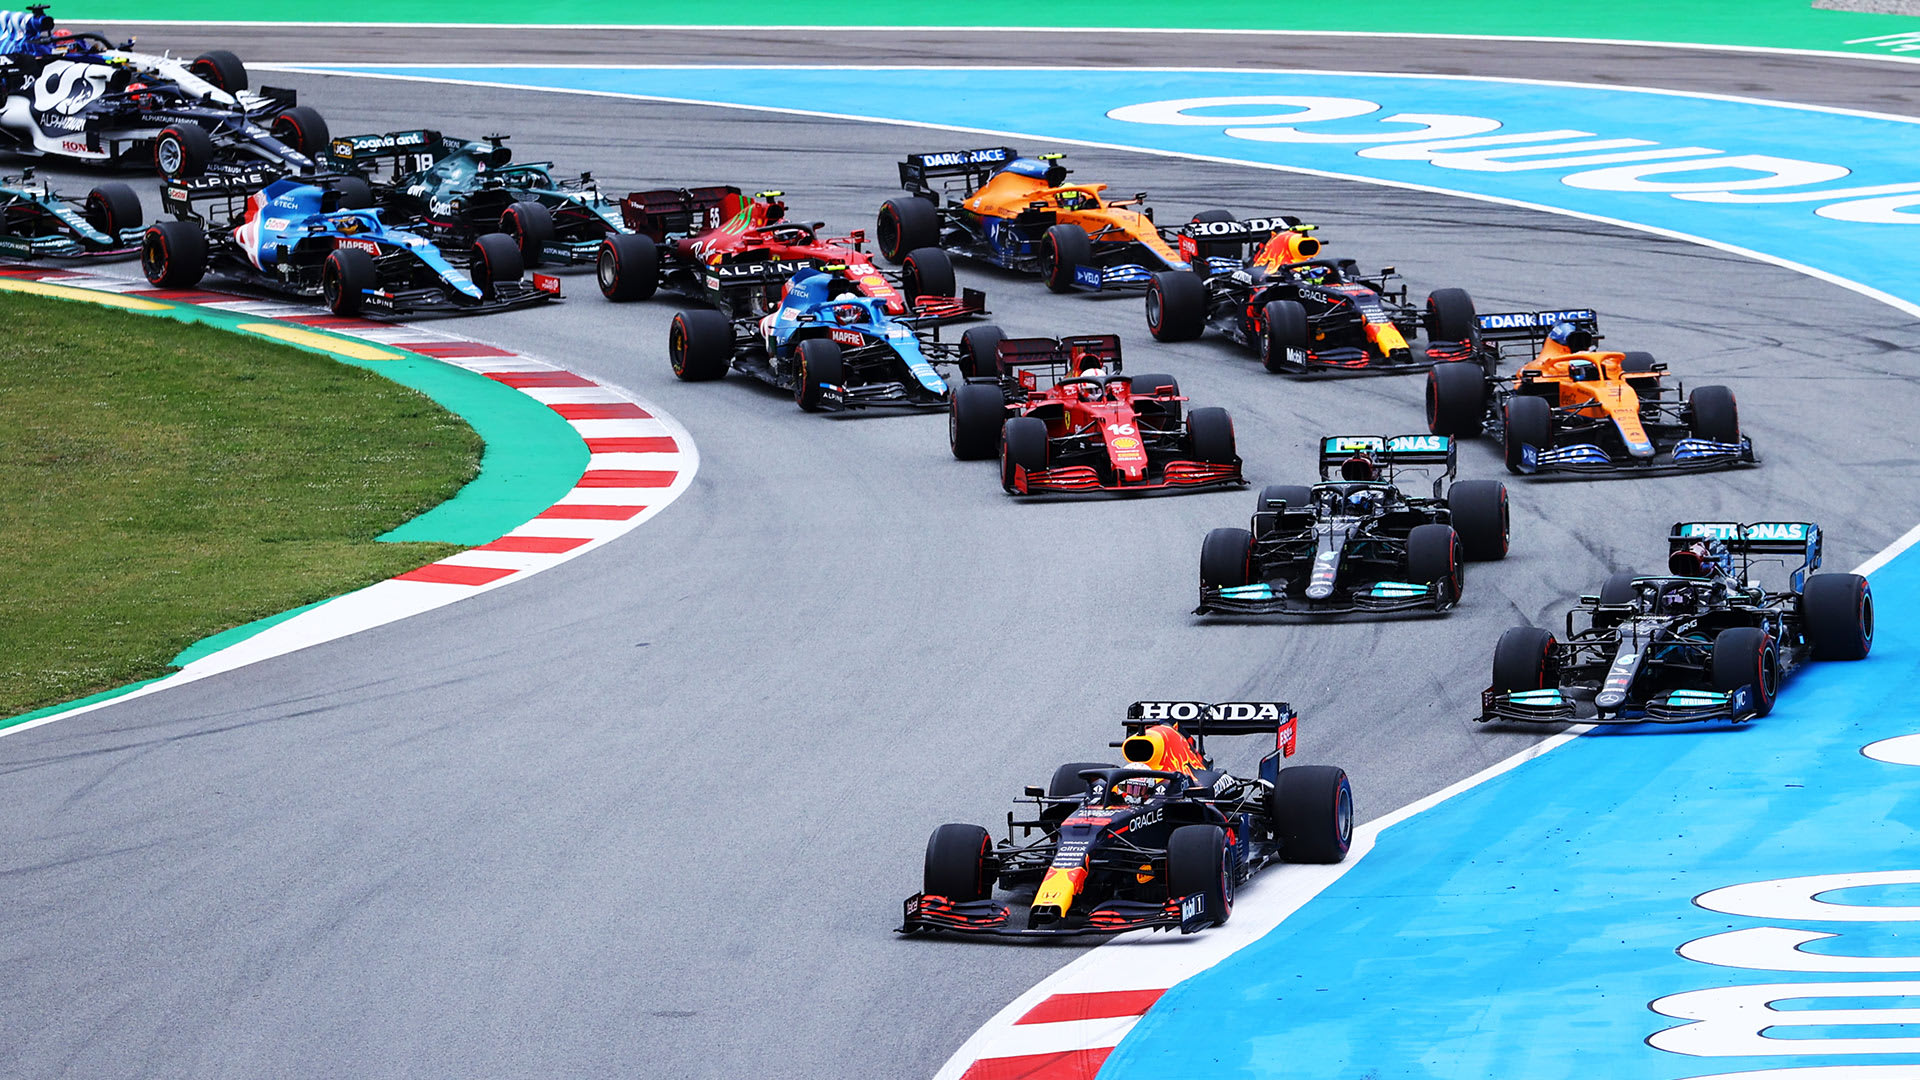 Max Verstappen leads the pack after a first-corner lunge on Lewis Hamilton at the Spanish Grand Prix.